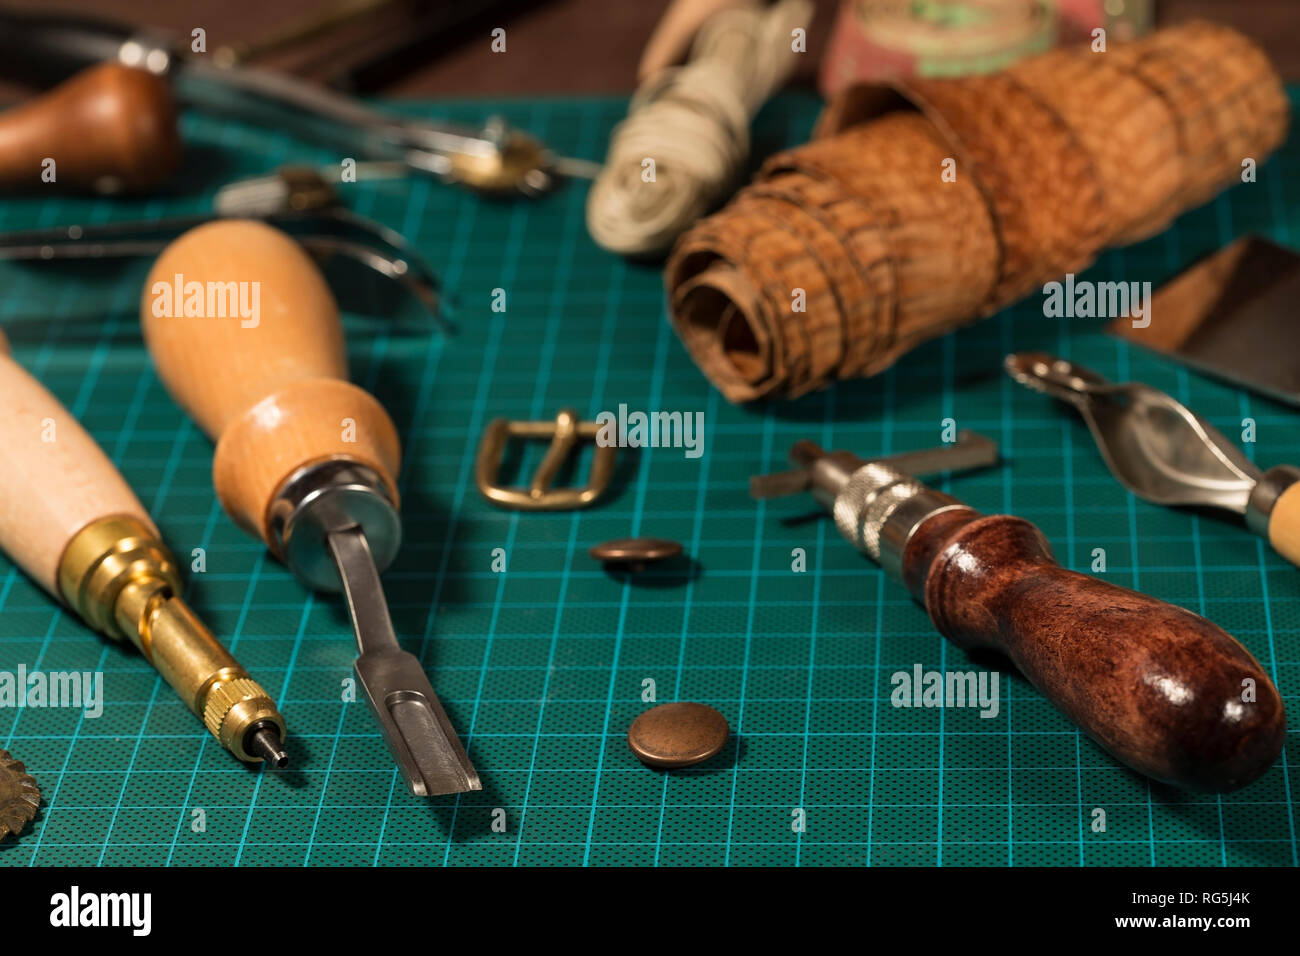 Leather Craft Tools On Cutting Mat Stock Photo 1511887040